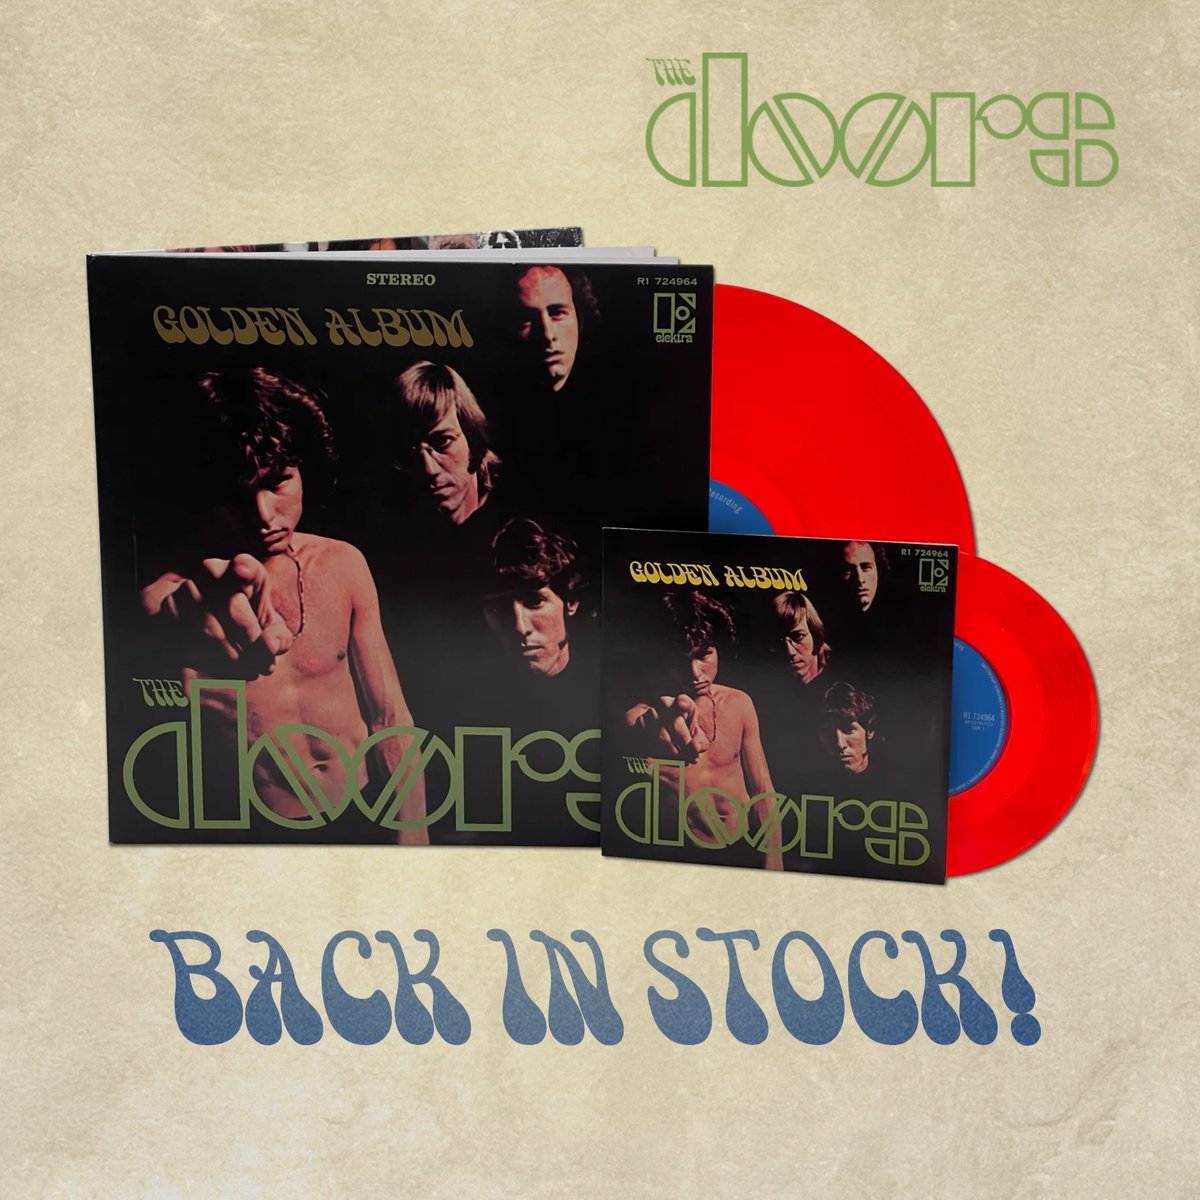 The Doors GOLDEN ALBUM is back in stock – an authentic re-creation of the band’s iconic 1968 Japanese compilation. Pressed on translucent Rhino Red vinyl and also includes a special si-track 7”. This album will not be available in stores and is exclusively available here. Get…